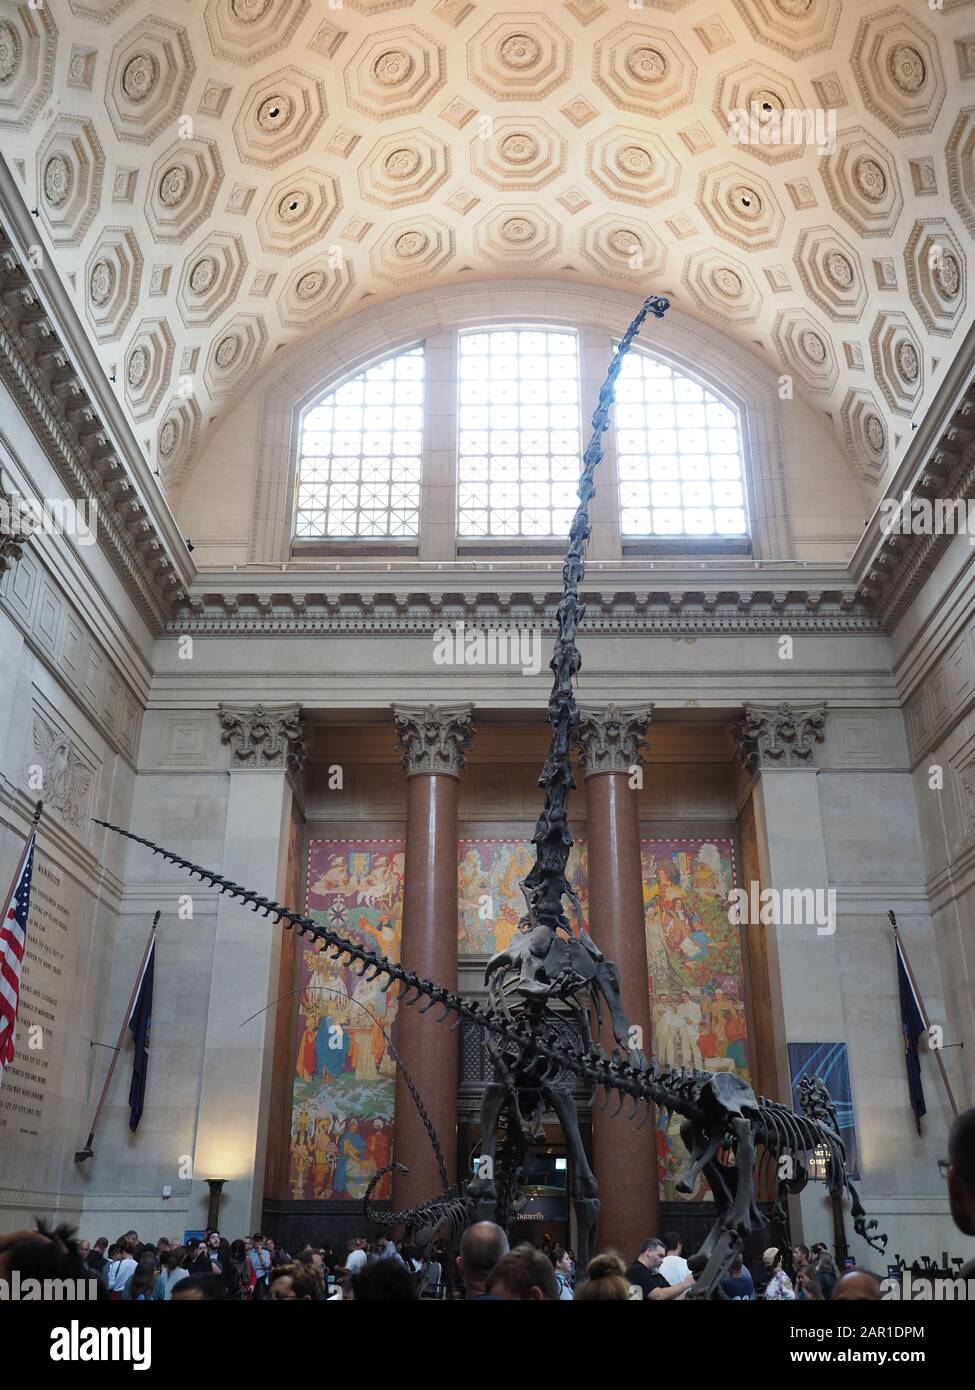 New York, USA - May 30, 2019: Image of the Theodore Roosevelt Rotunda. This hall is the entrance to the American Museum of Natural History in New York Stock Photo